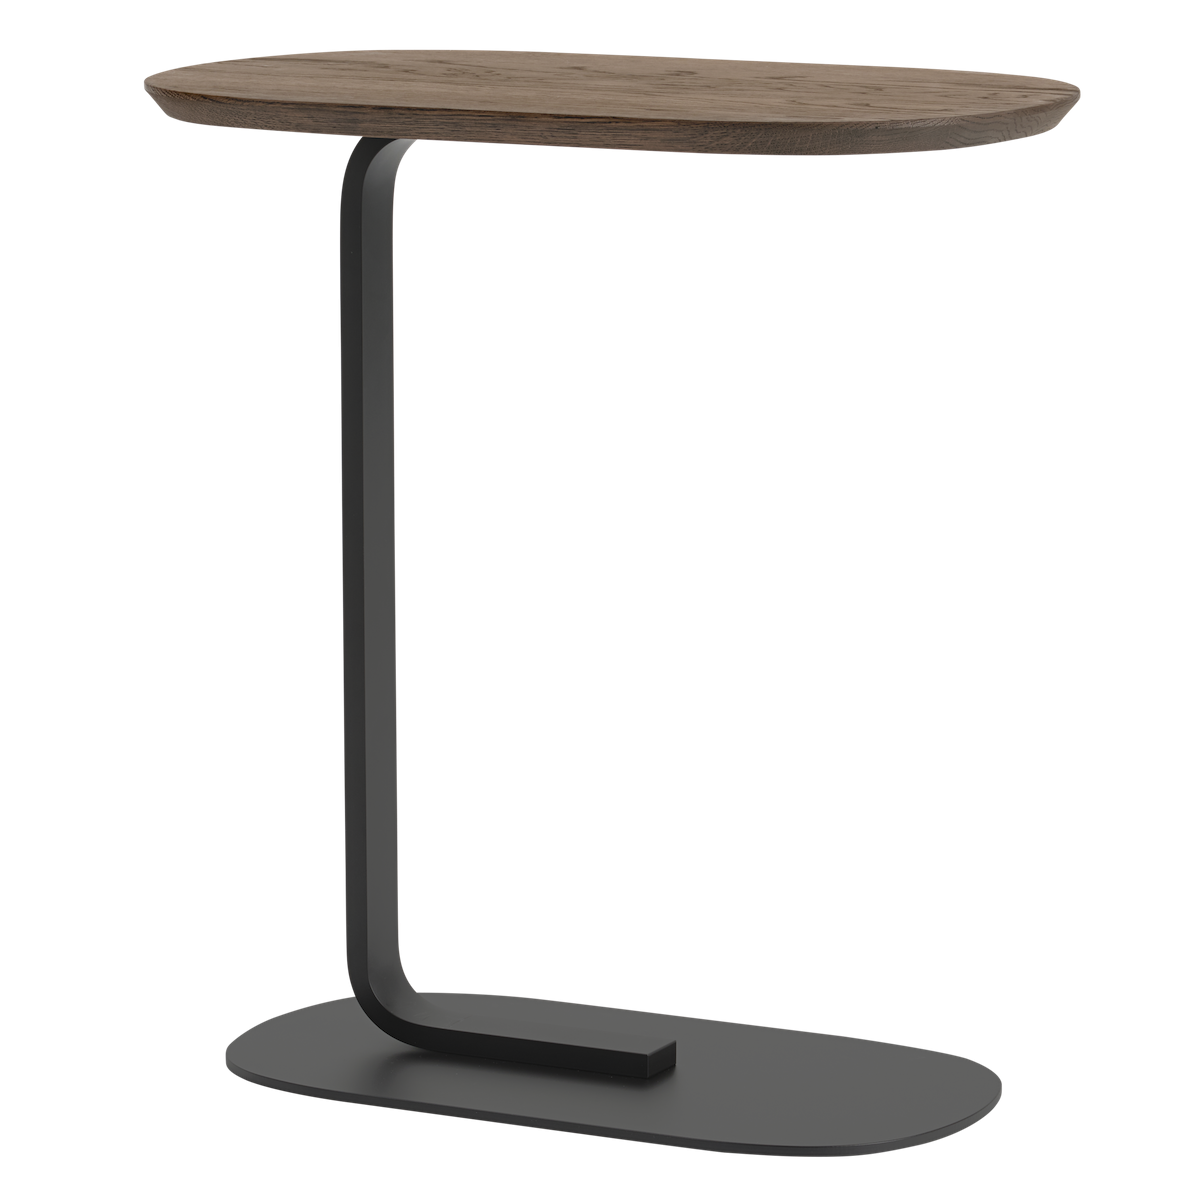 H60,5cm - solid smoked oak / black - Relate side table